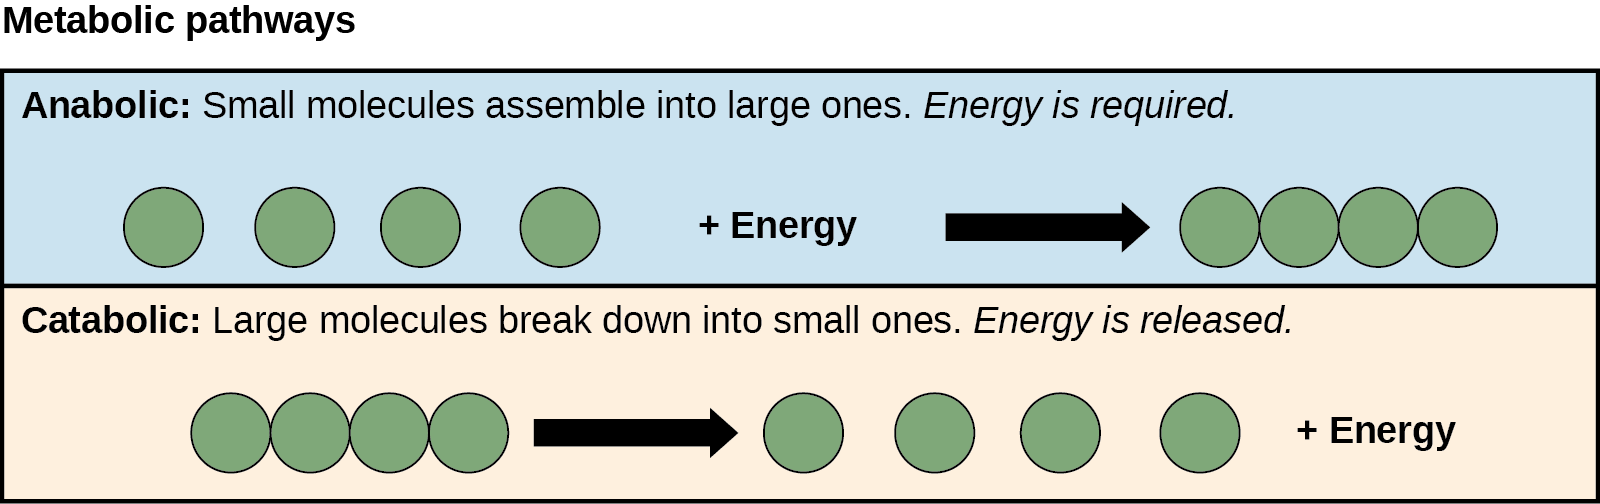 Anabolic and catabolic pathways are shown. In the anabolic pathway (top), four small molecules have energy added to them to make one large molecule. In the catabolic pathway (bottom), one large molecule is broken down into two components: four small molecules plus energy.